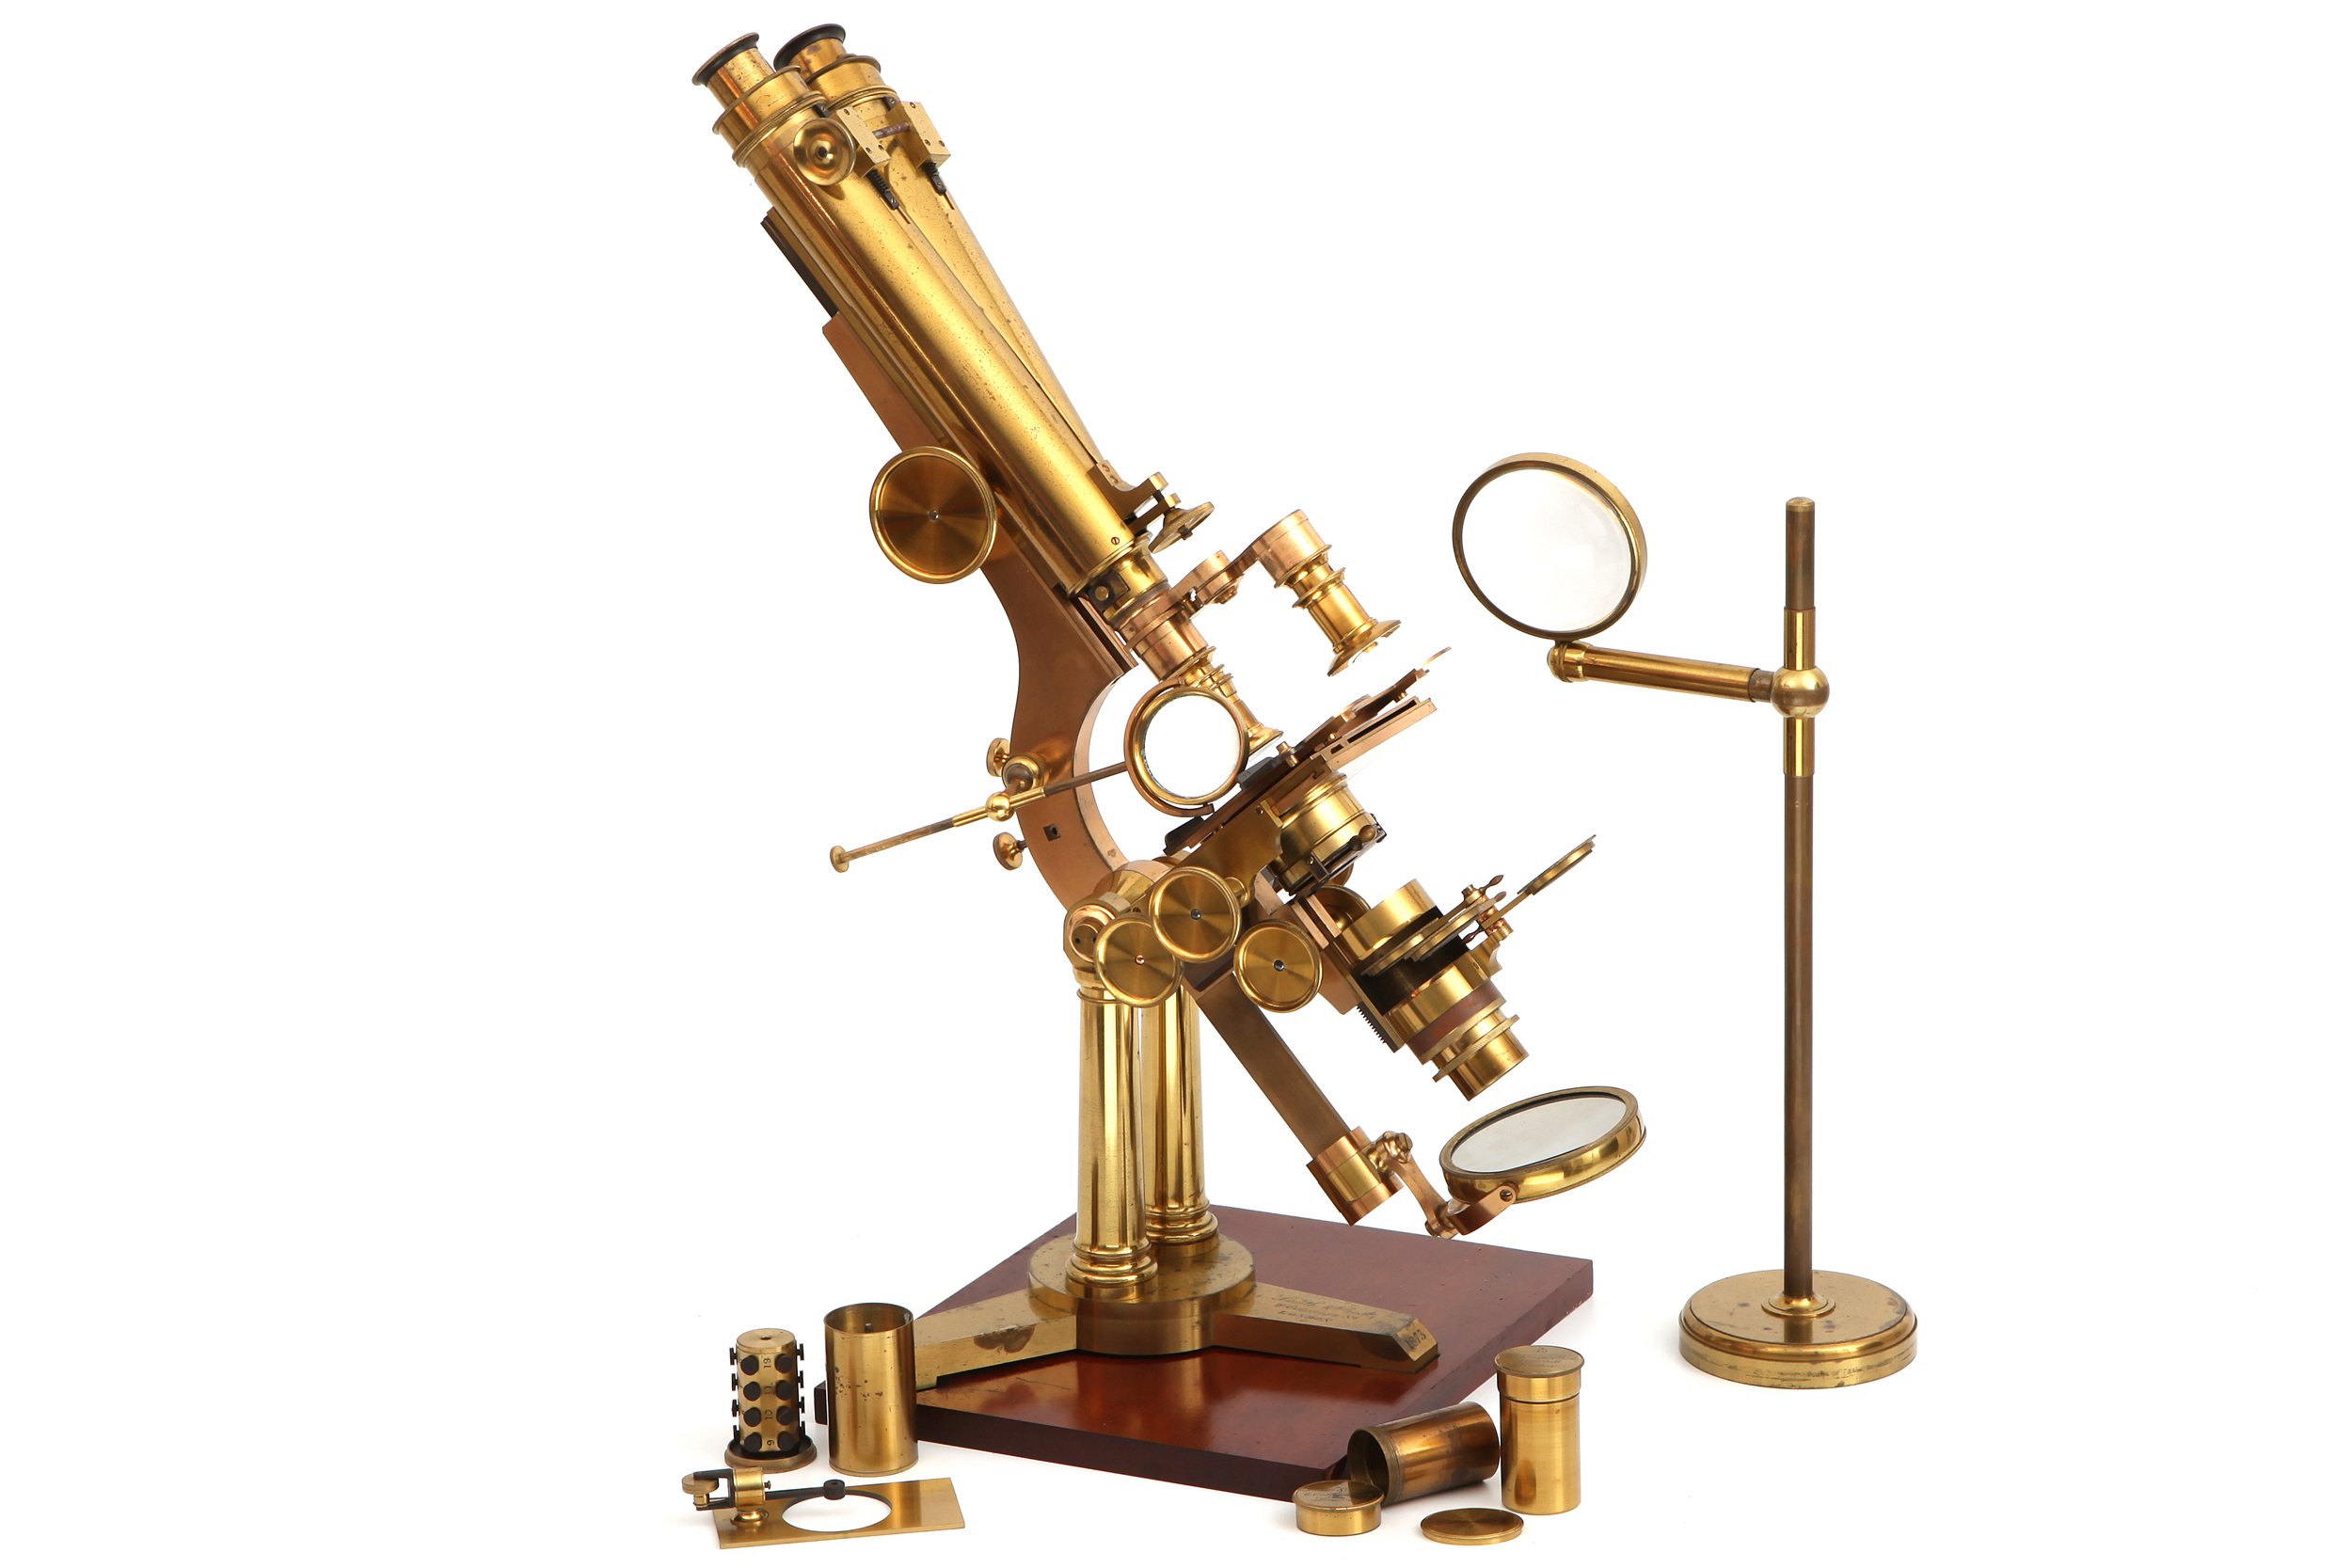 A Fine Binocular 'Large Best', or 'N°1 Stand' Microscope Outfit, - Image 3 of 6